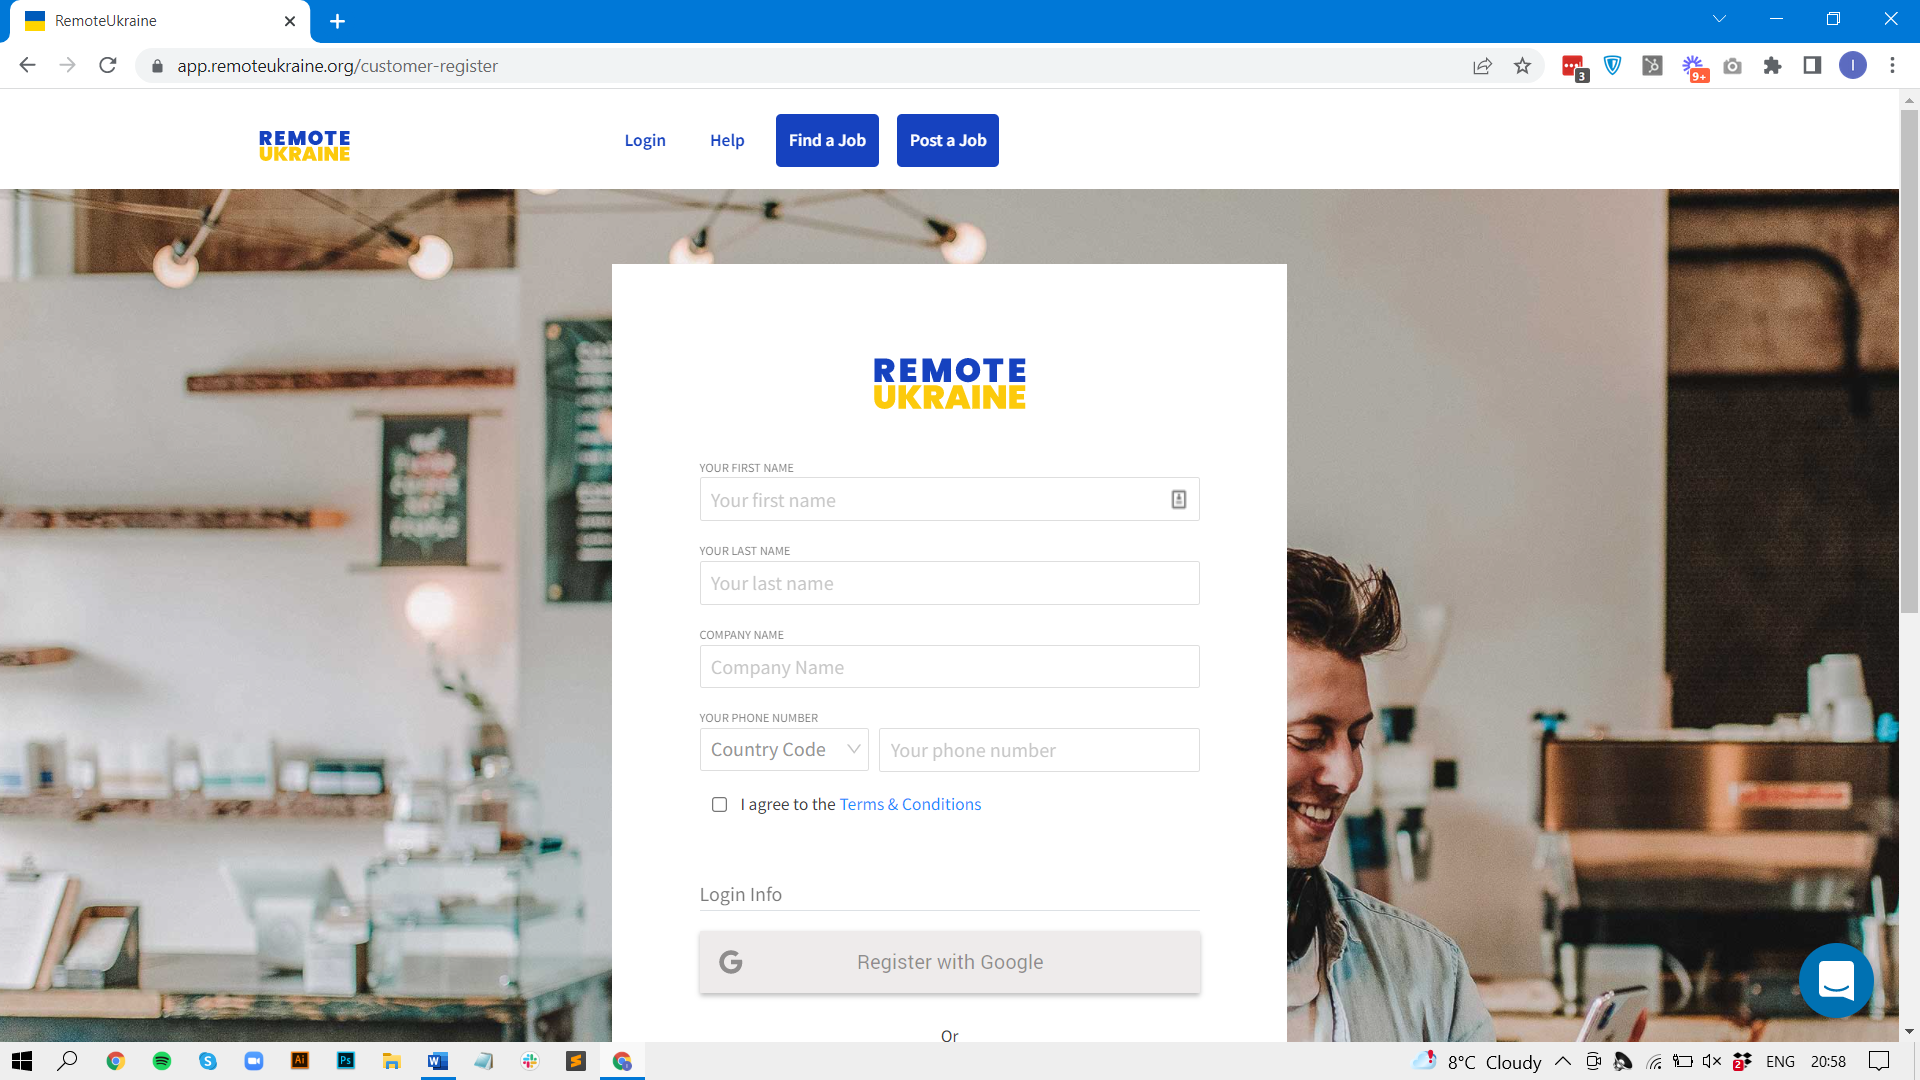 RemoteUkraine is a non-profit platform with remote jobs for Ukrainians from foreign companies, developed by the British. - war-in-ukraine, news-en